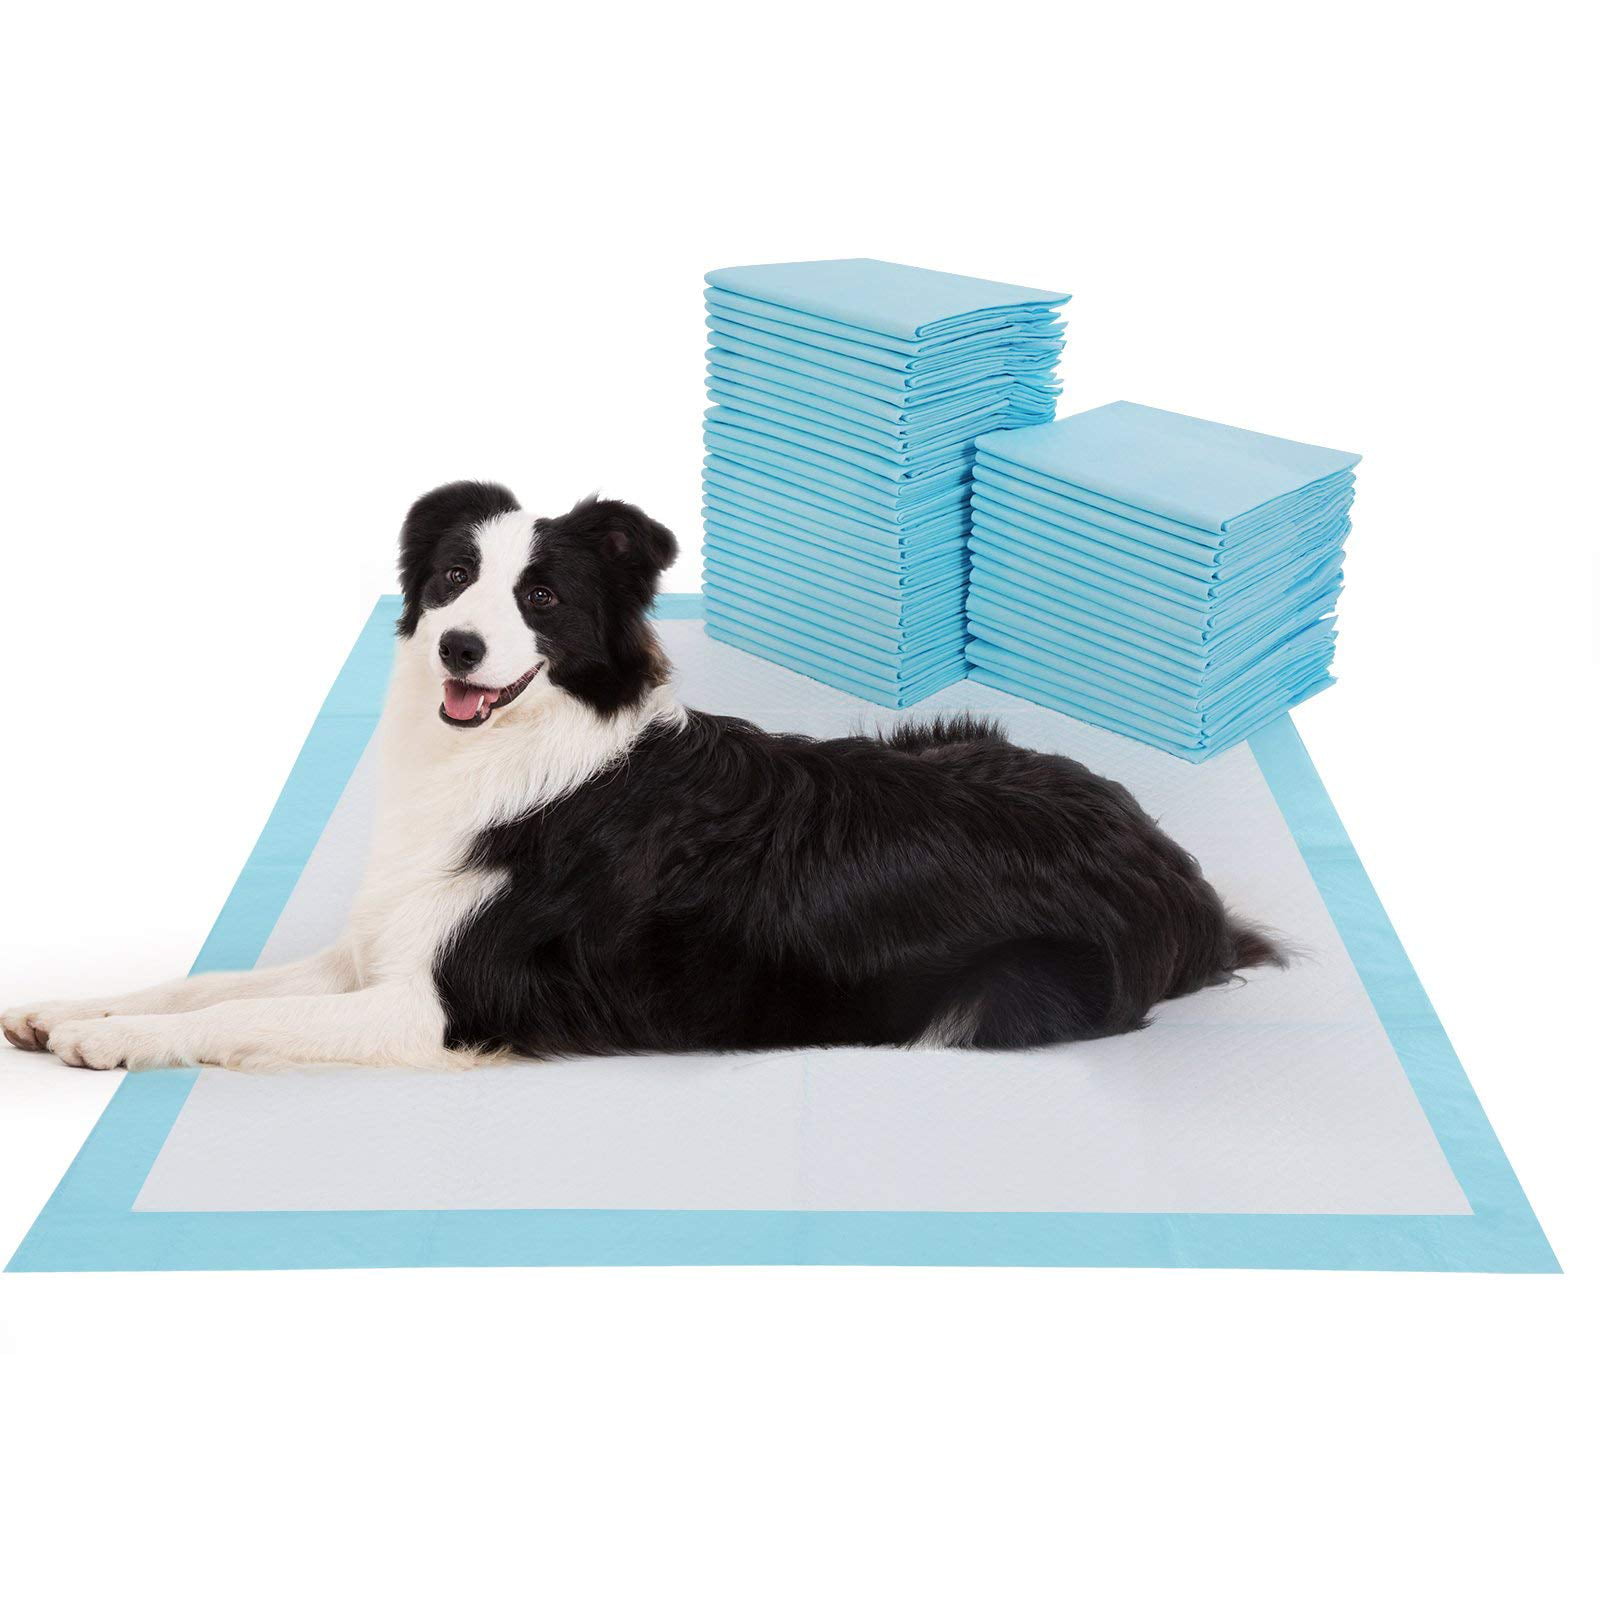 BESTLE Extra Large Pet Training and Puppy Pads Pee Pads